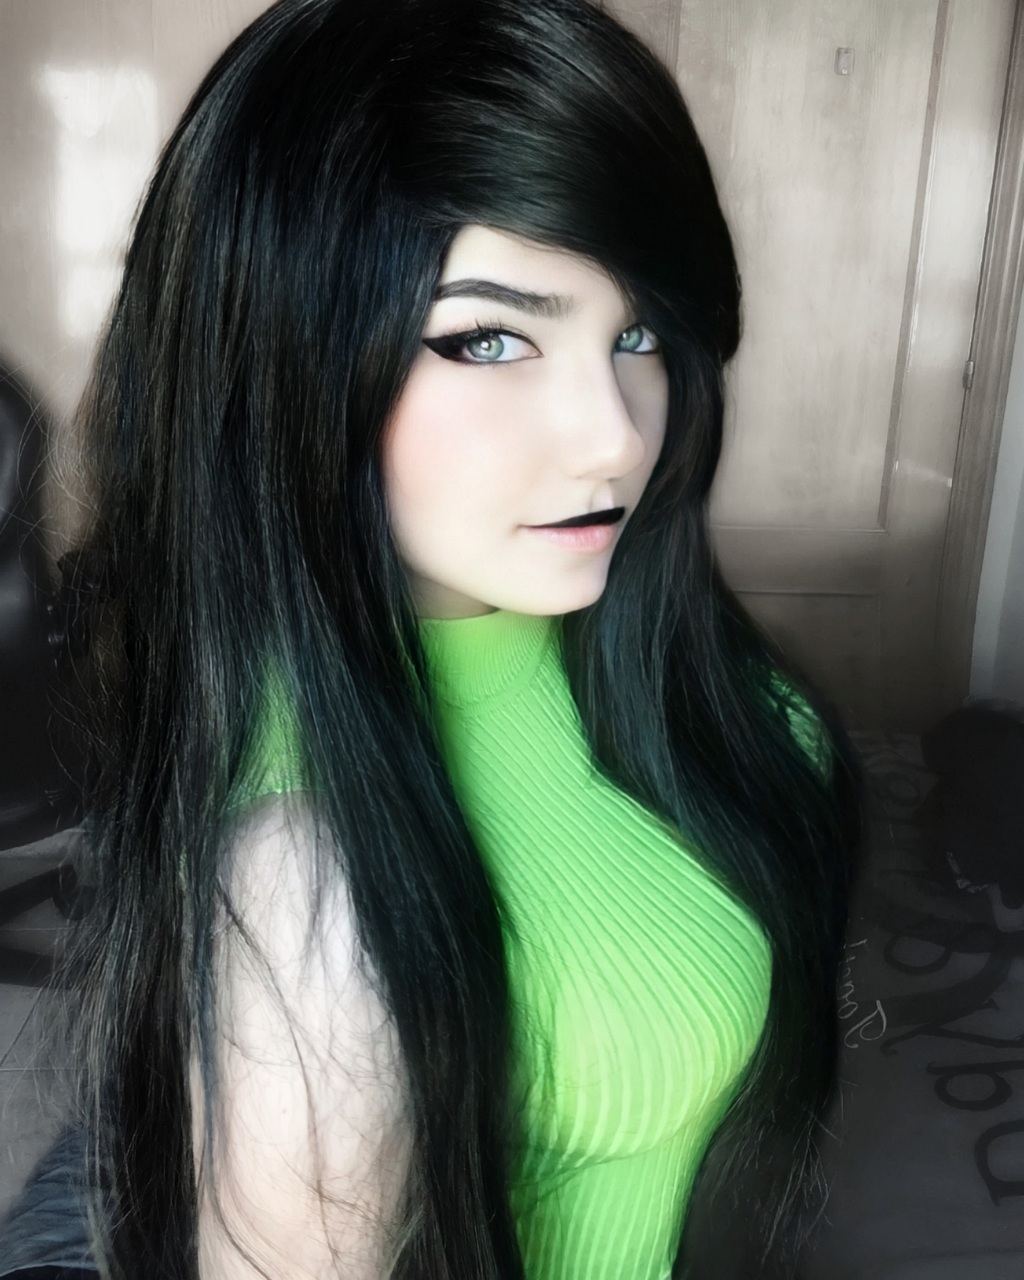 A I Too Bad For You Shego Costest By Kuuroish